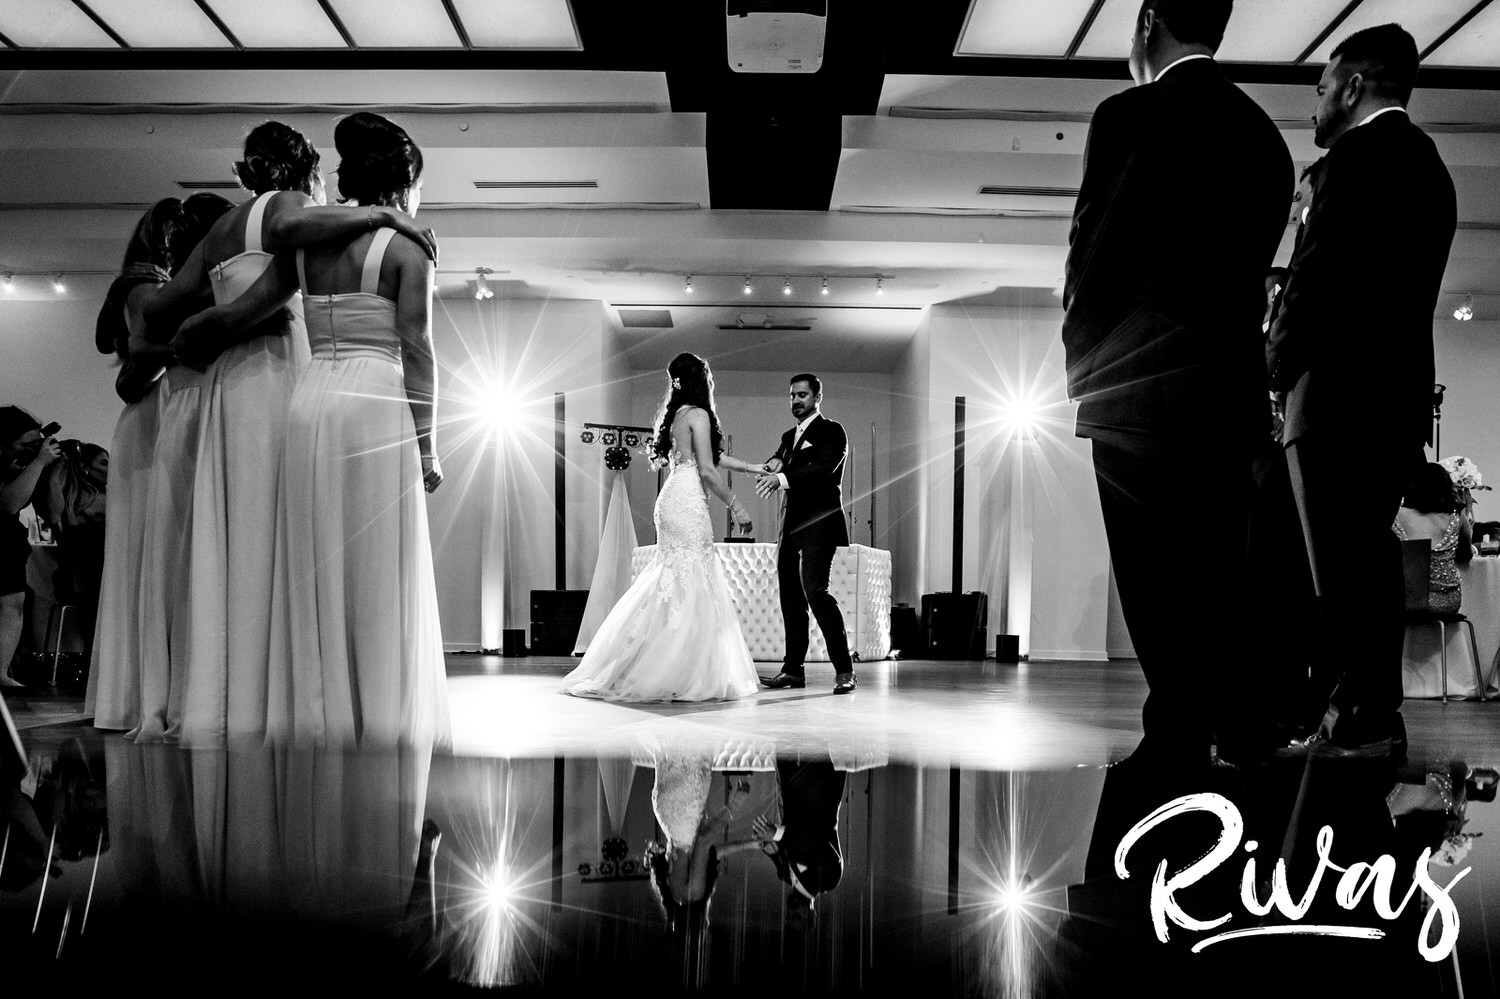 A candid black and white picture of a bride and groom sharing their first dance, as their wedding party stands watching during a wedding reception at The Gallery in downtown Kansas City. 